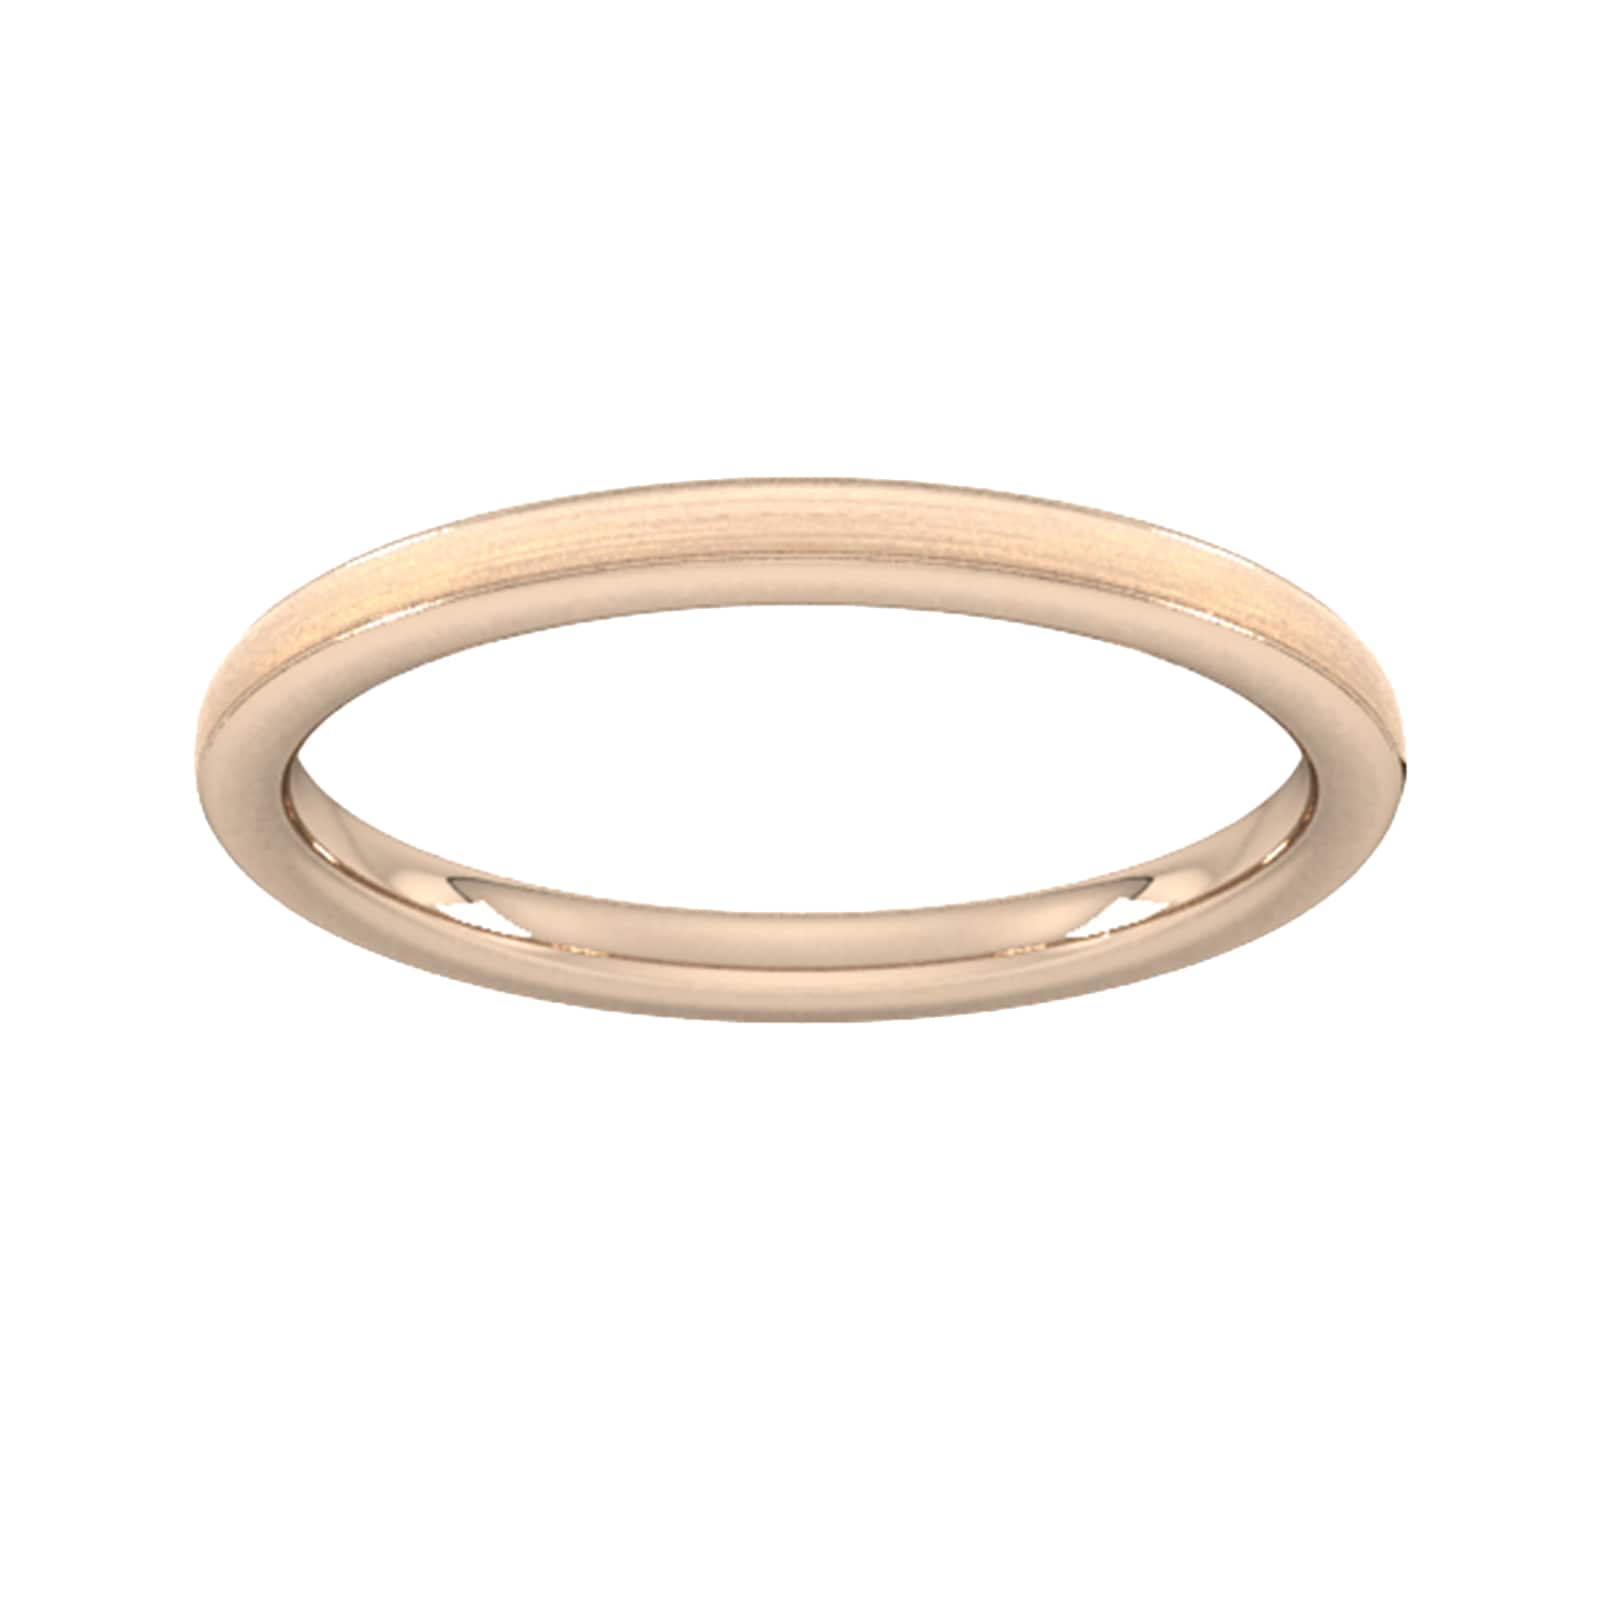 2mm D Shape Standard Matt Centre With Grooves Wedding Ring In 18 Carat Rose Gold - Ring Size I